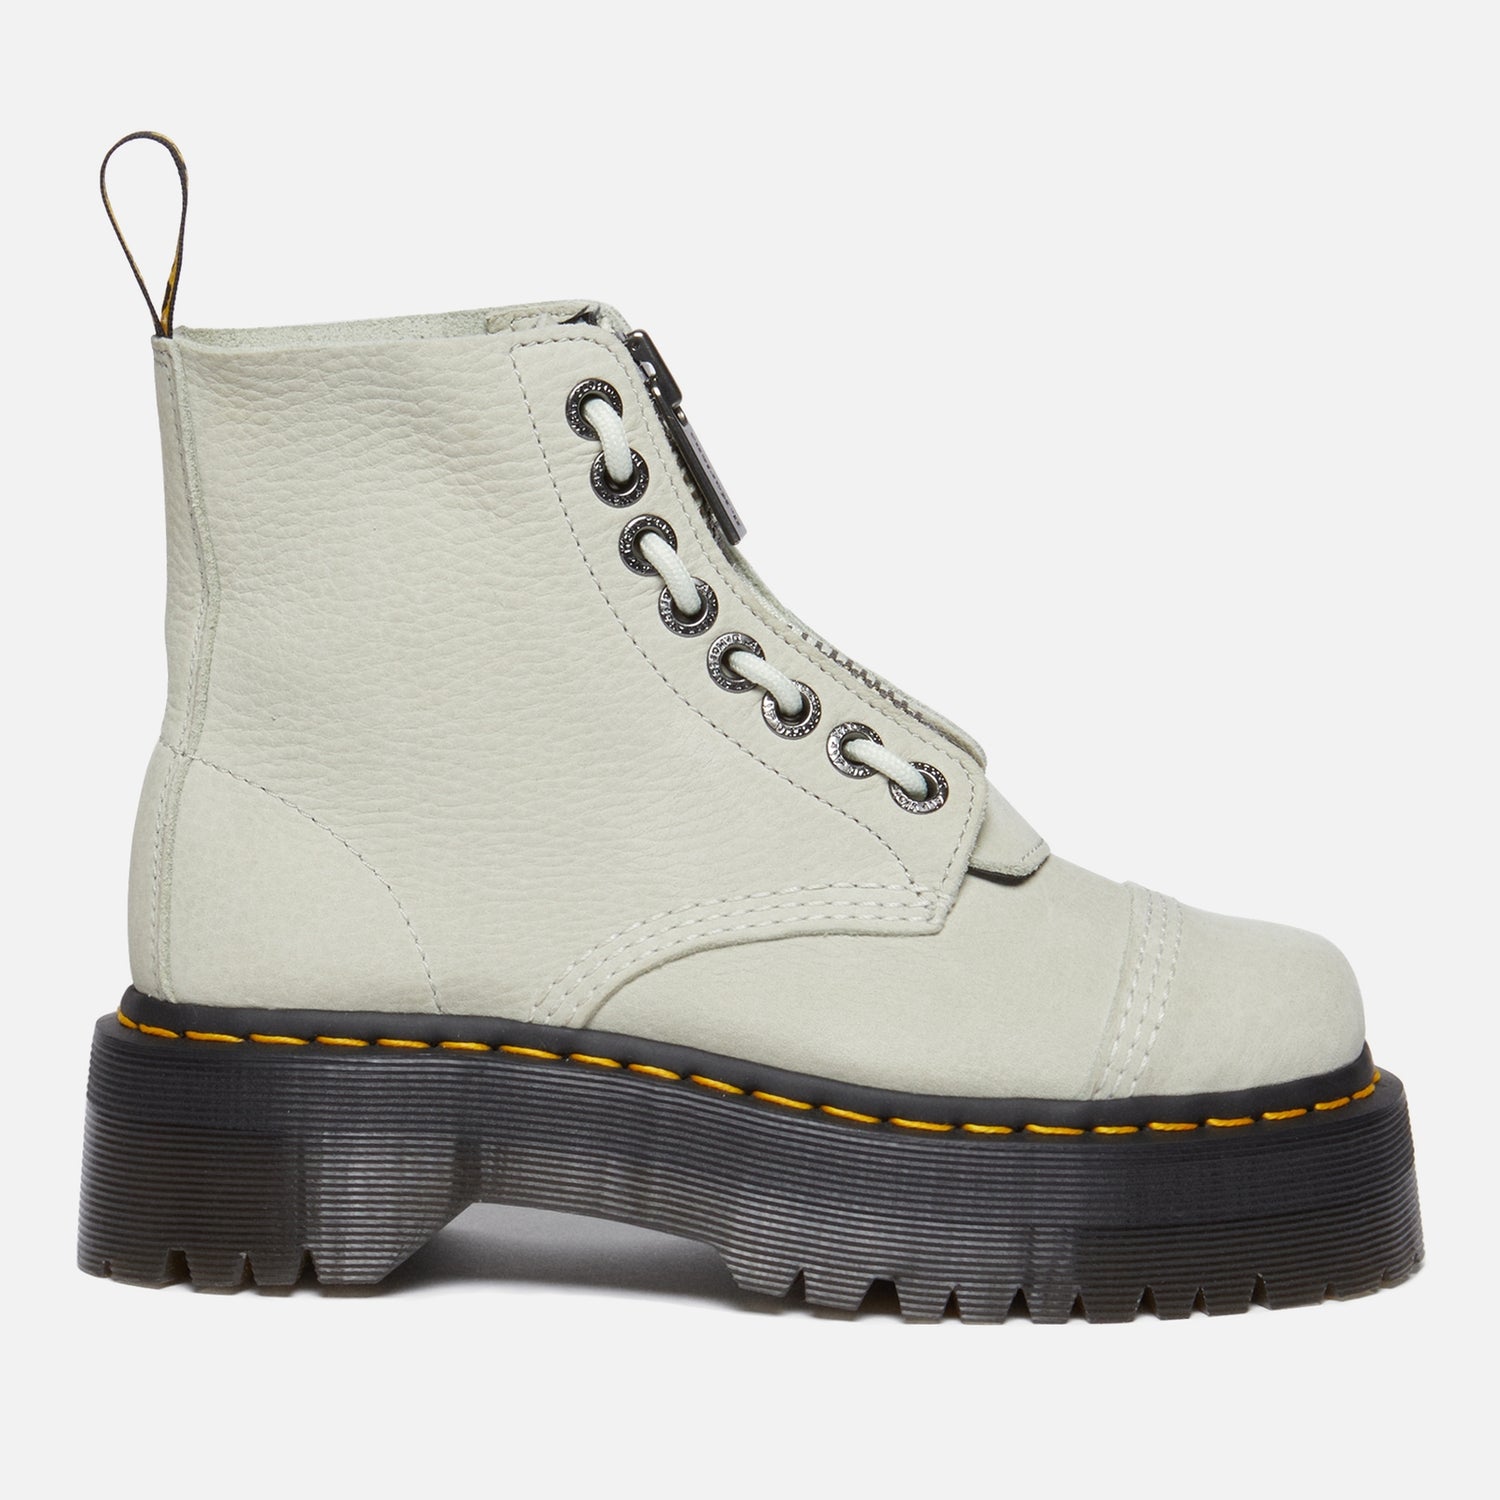 Dr. Martens Women's Sinclair Leather Zip Front Boots - Smoked Mint - UK 3